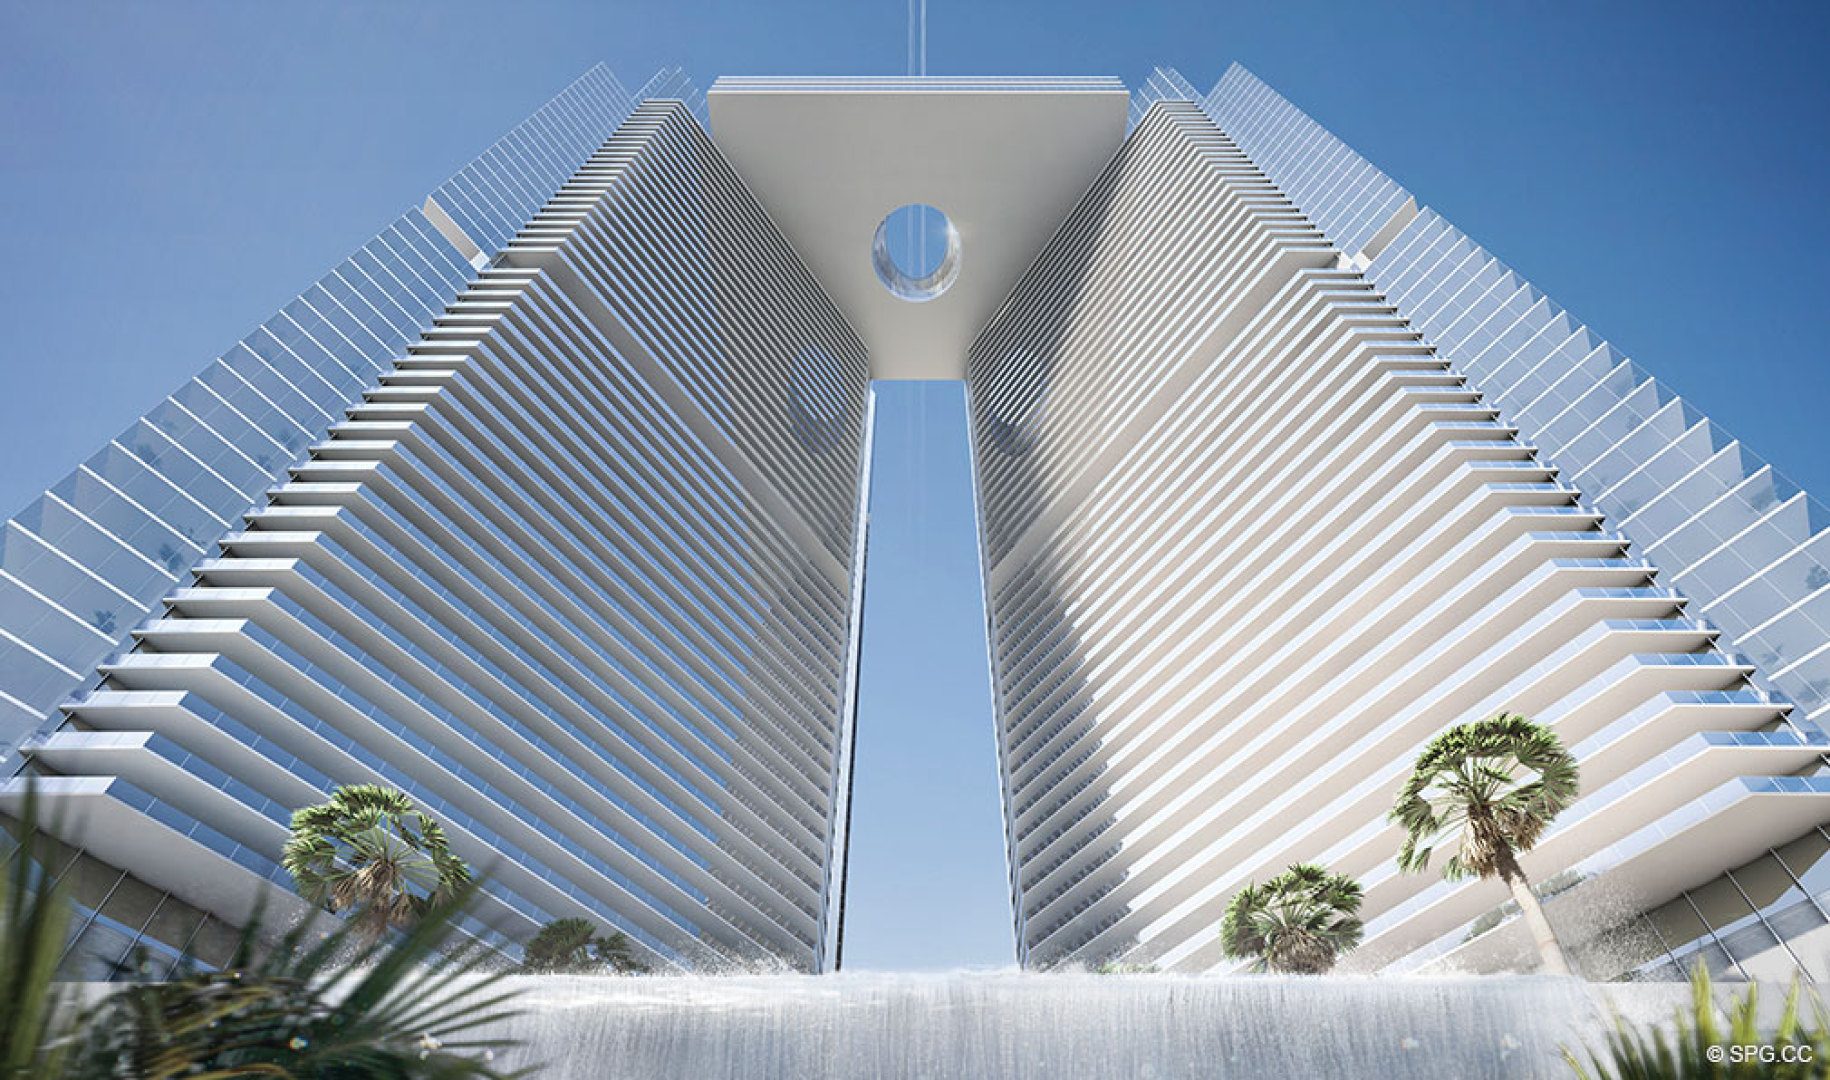 Looking up at One River Point, Luxury Waterfront Condos in Miami, Florida 33130